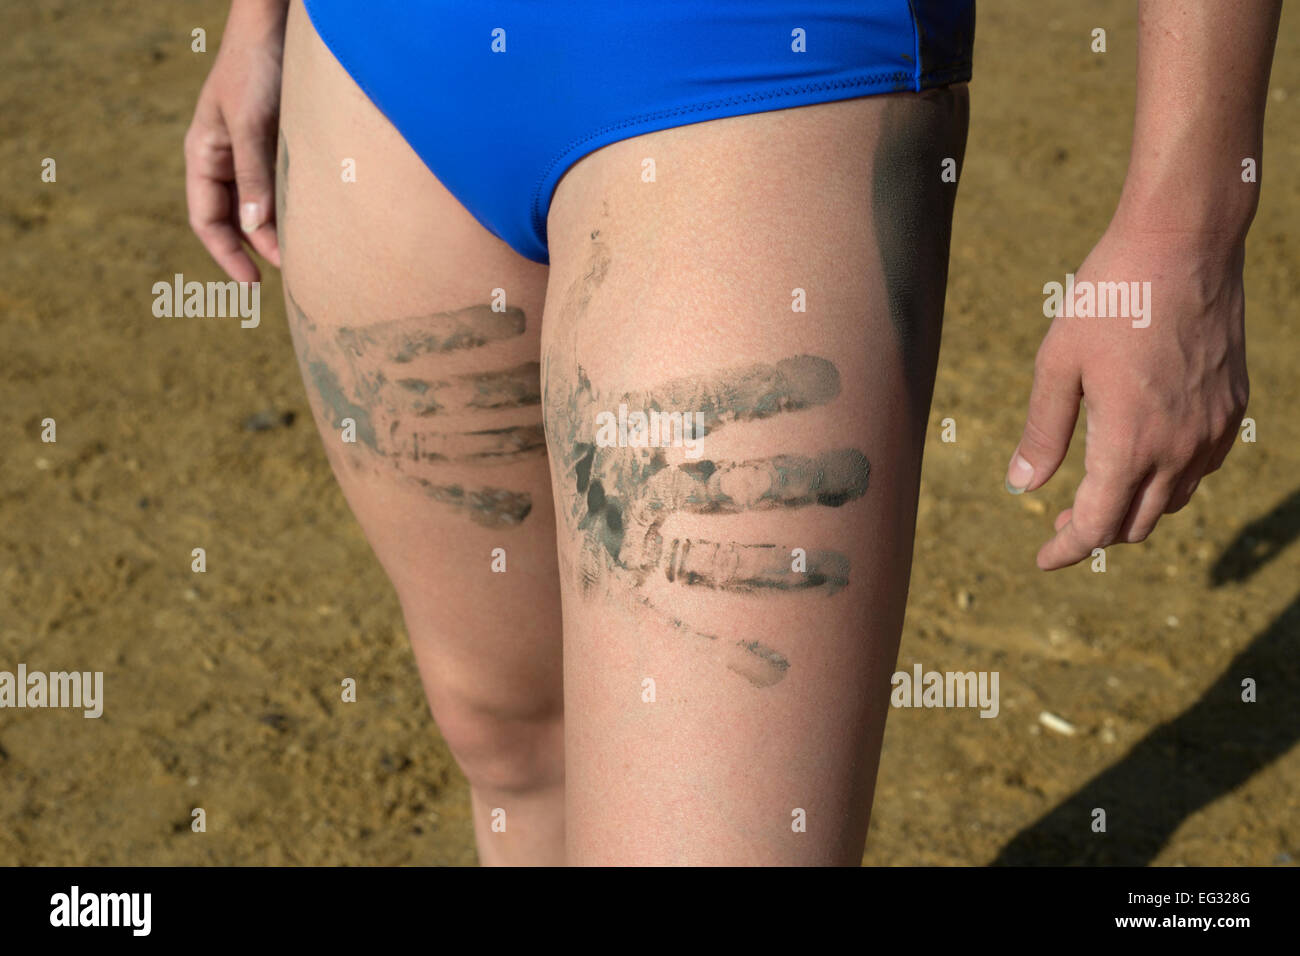 Young woman with mud palm prints on her legs model released Stock Photo